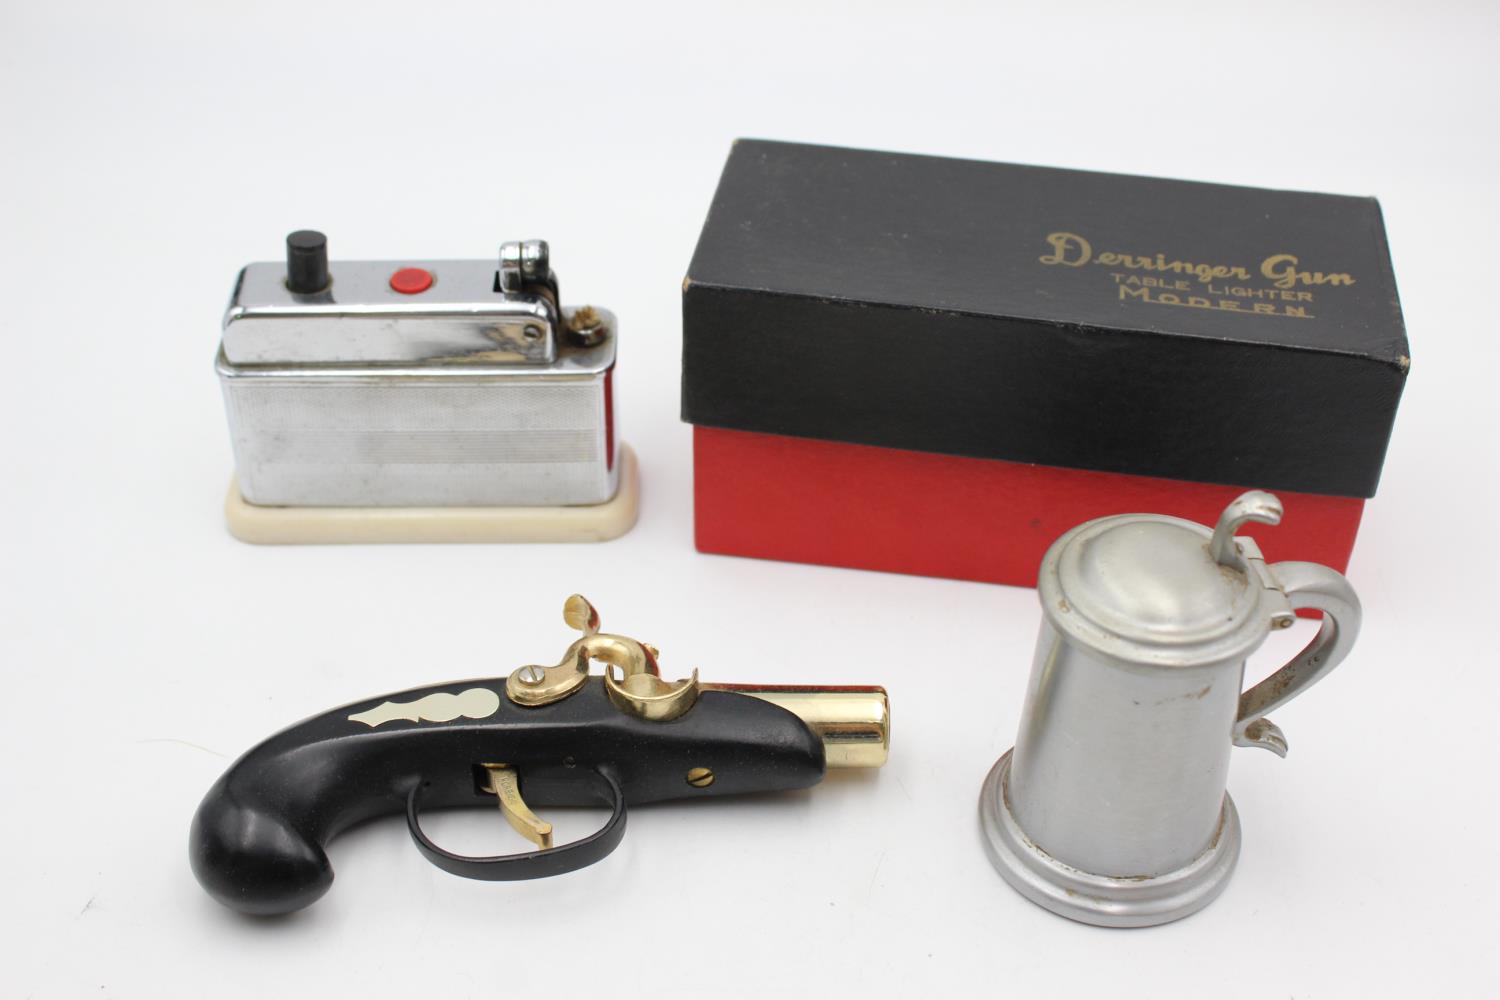 3 x Assorted Vintage TABLE LIGHTERS Inc. Dunhill Tankard & Boxed Derringer Gun UNTESTED Items are in